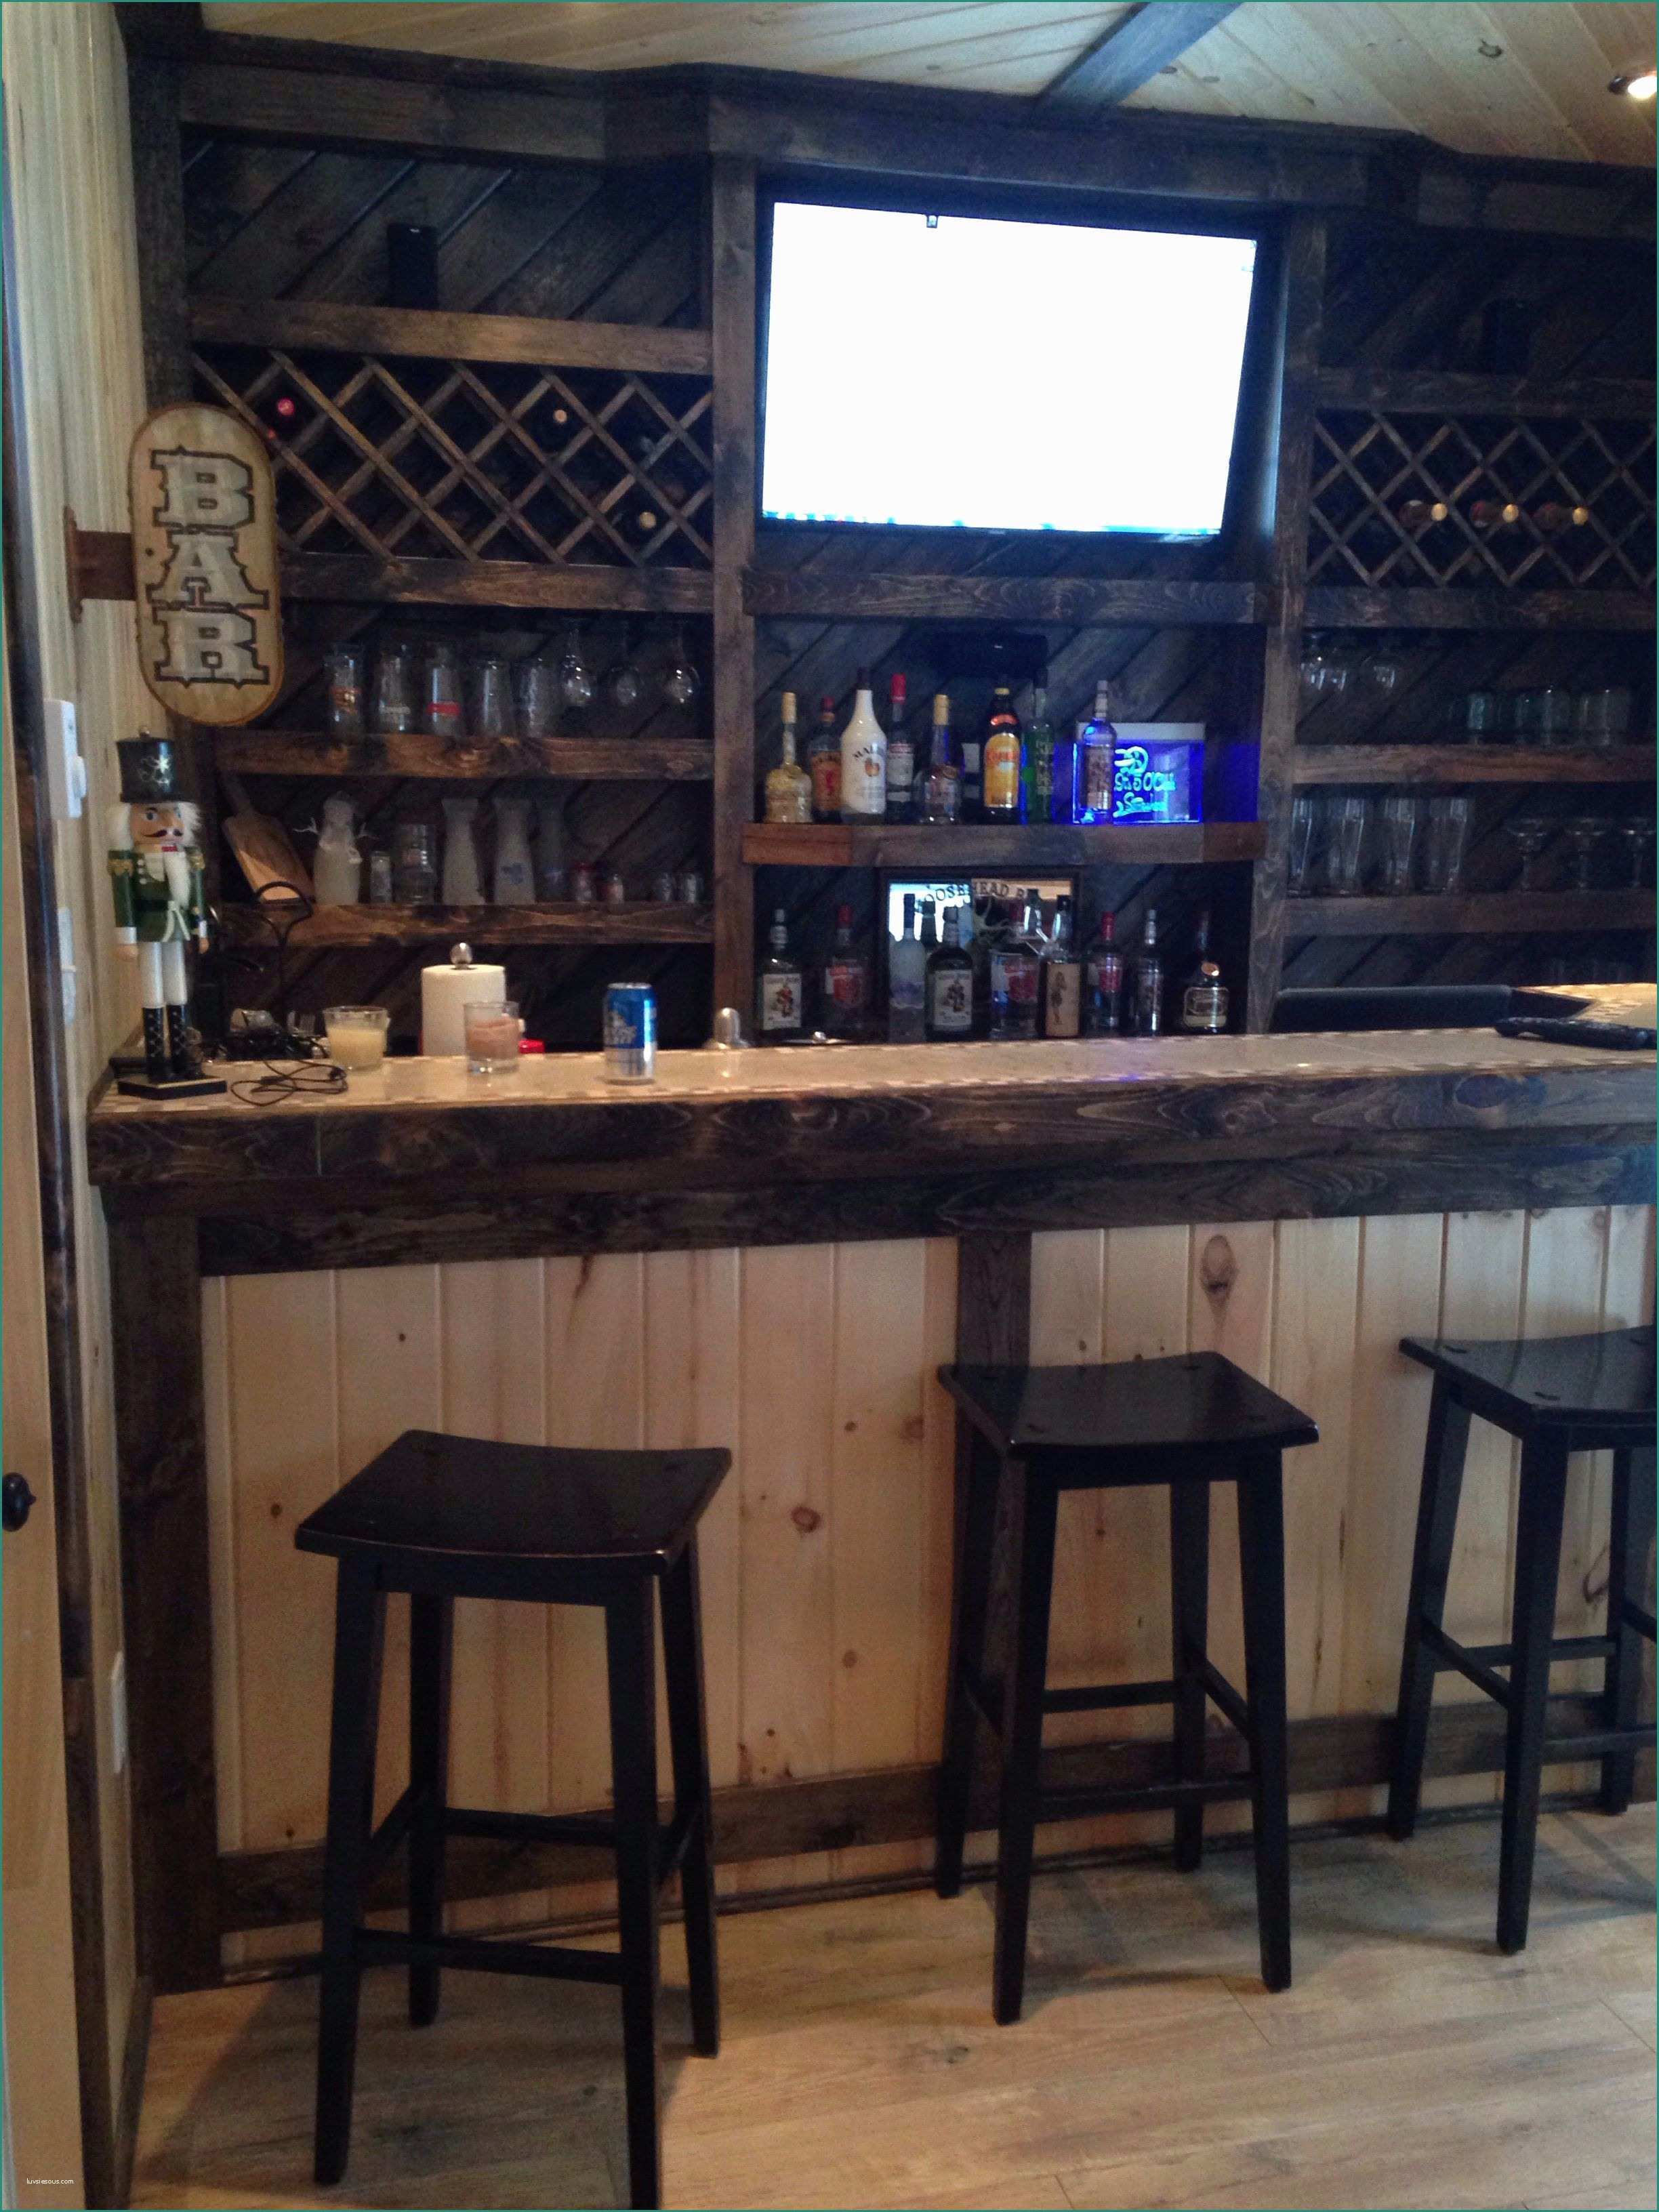 Sgabelli Stile Industriale E Garage Bar Idea for the Hubby S Man Cave Like This but How Would